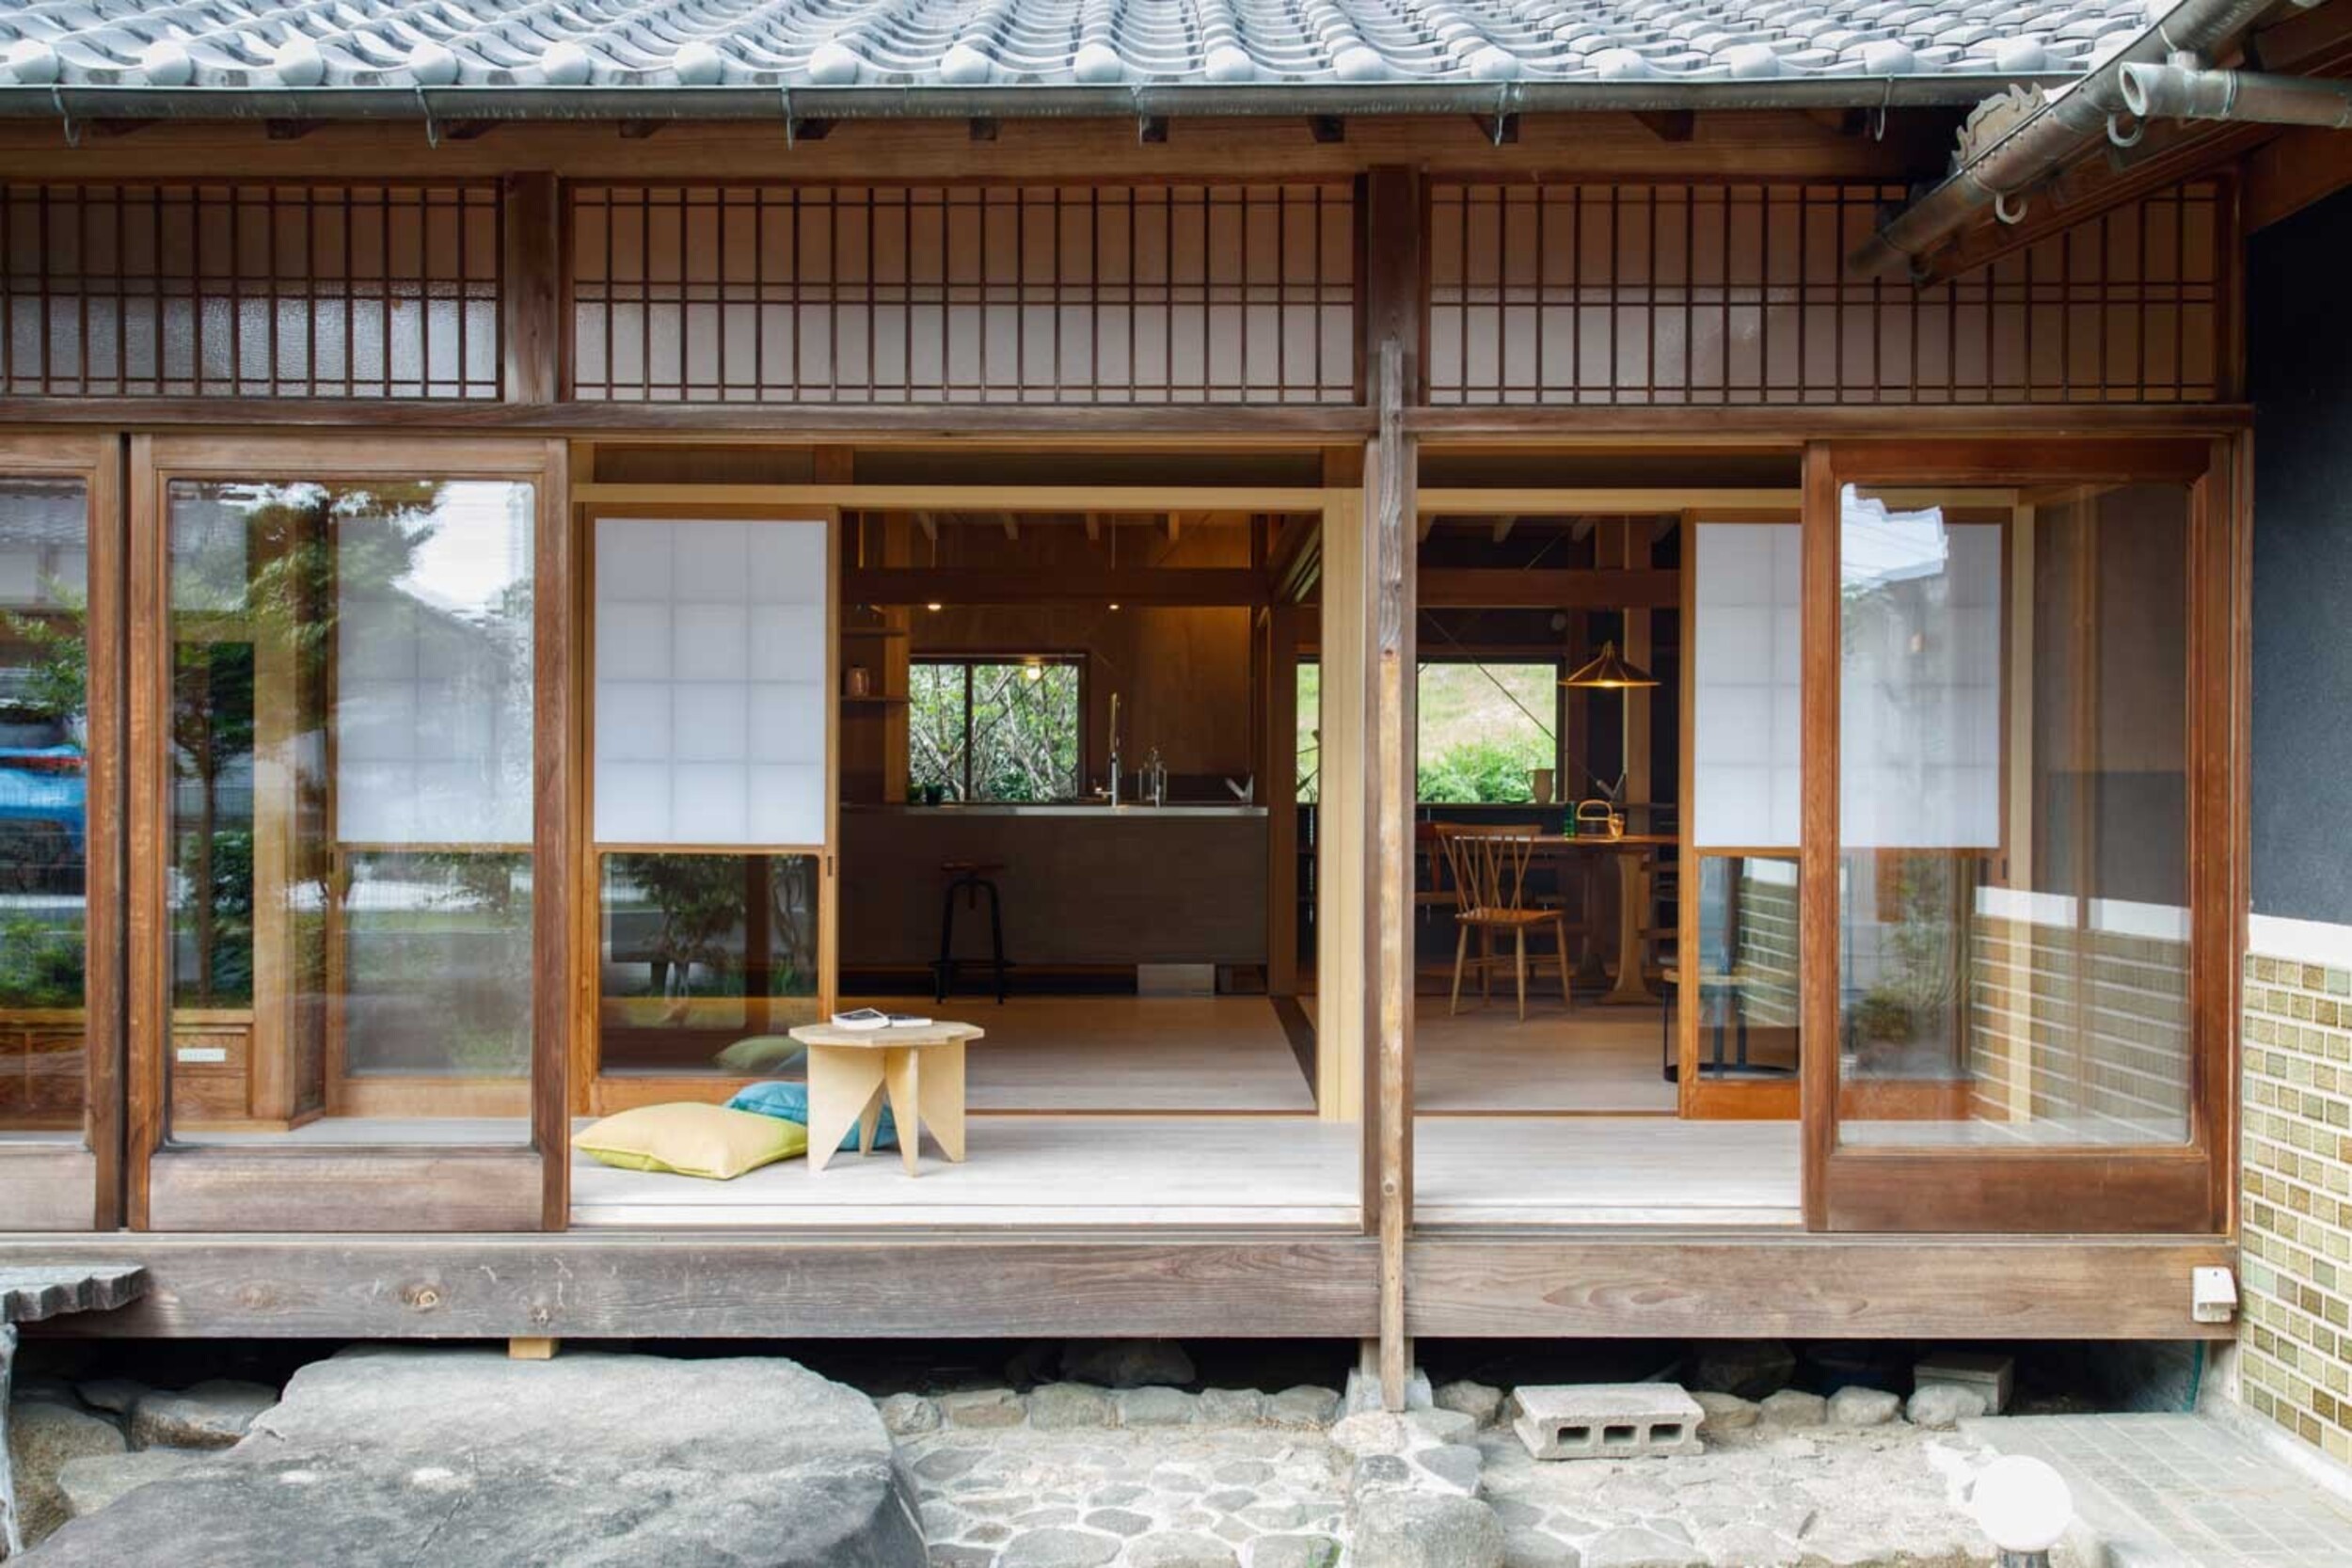 Veranda (ENGAWA) of T House when viewed from the outside